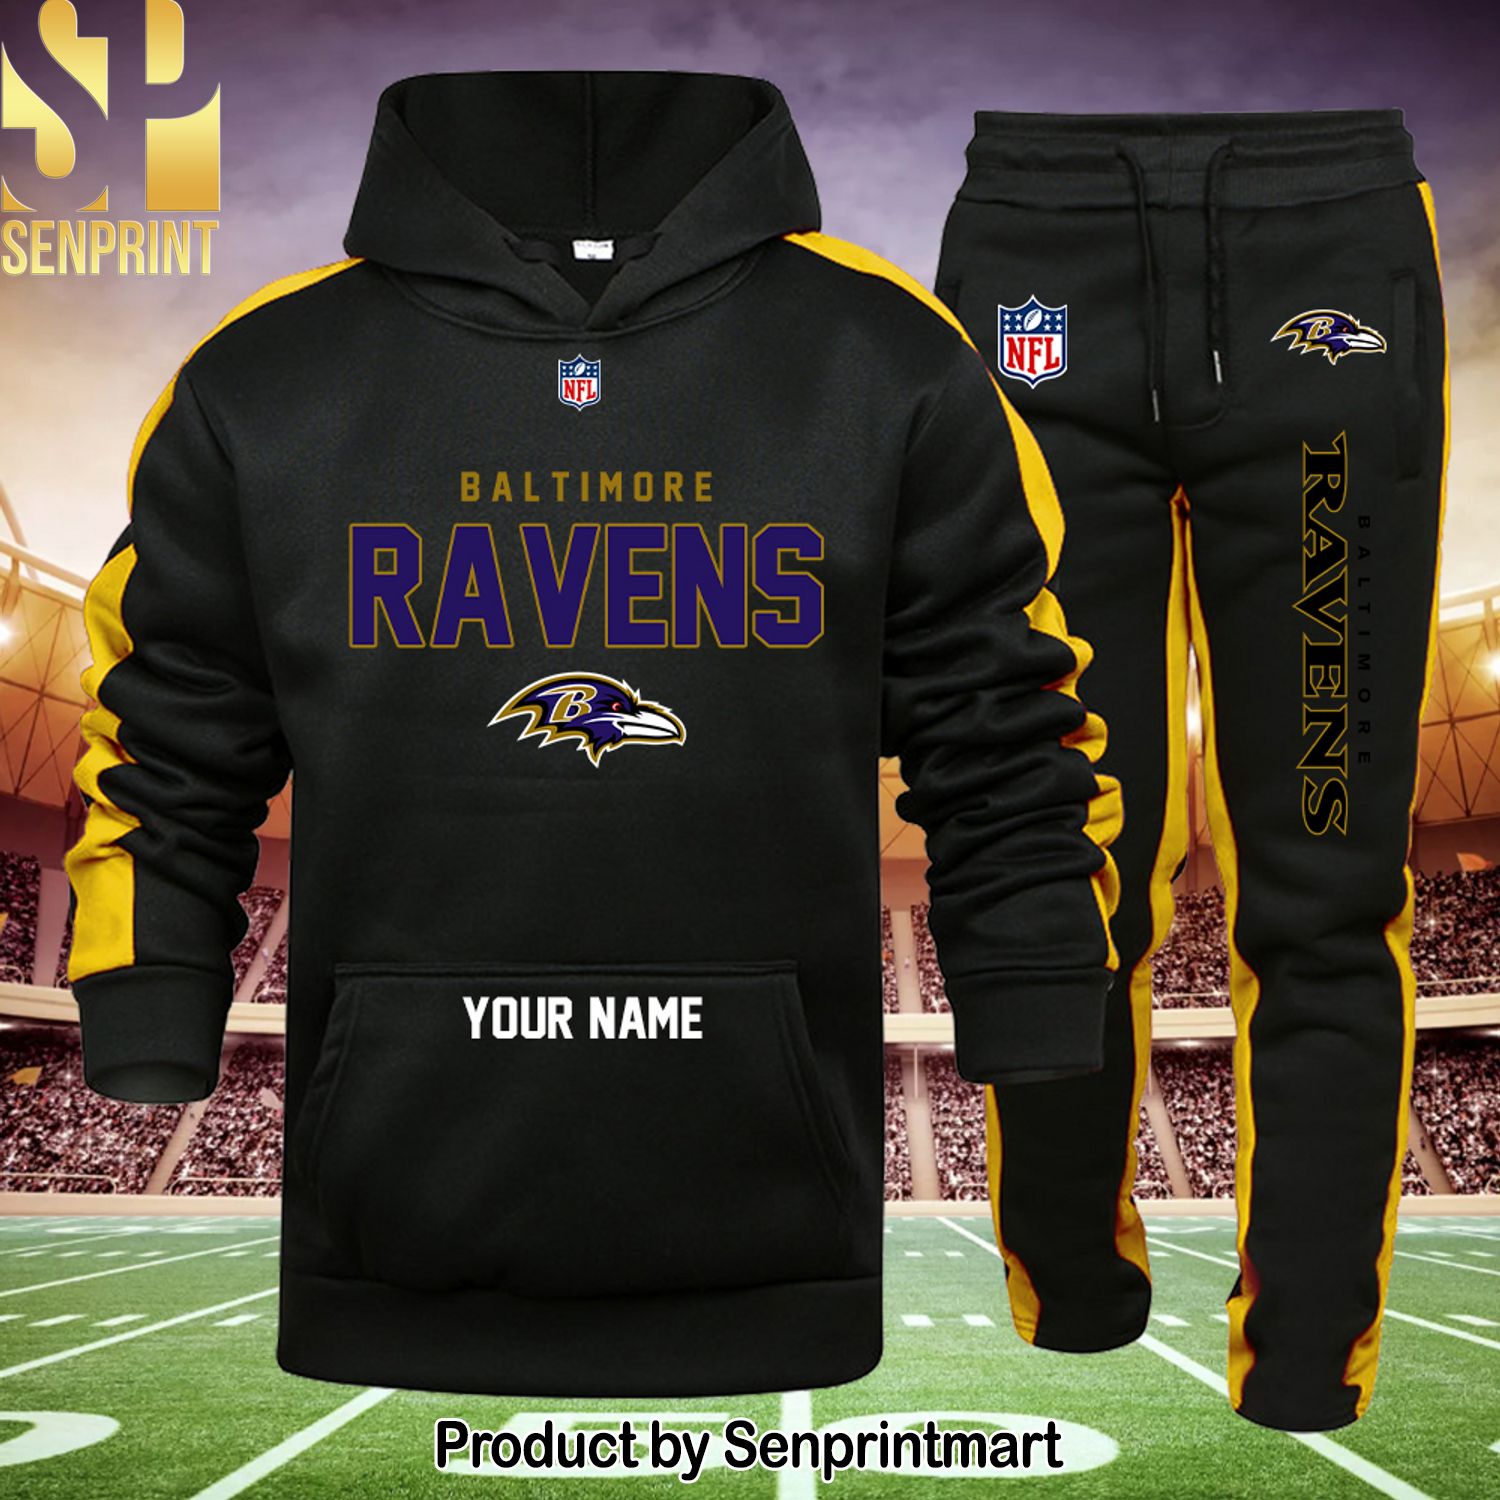 NFL Baltimore Ravens Best Combo All Over Print Shirt and Sweatpants